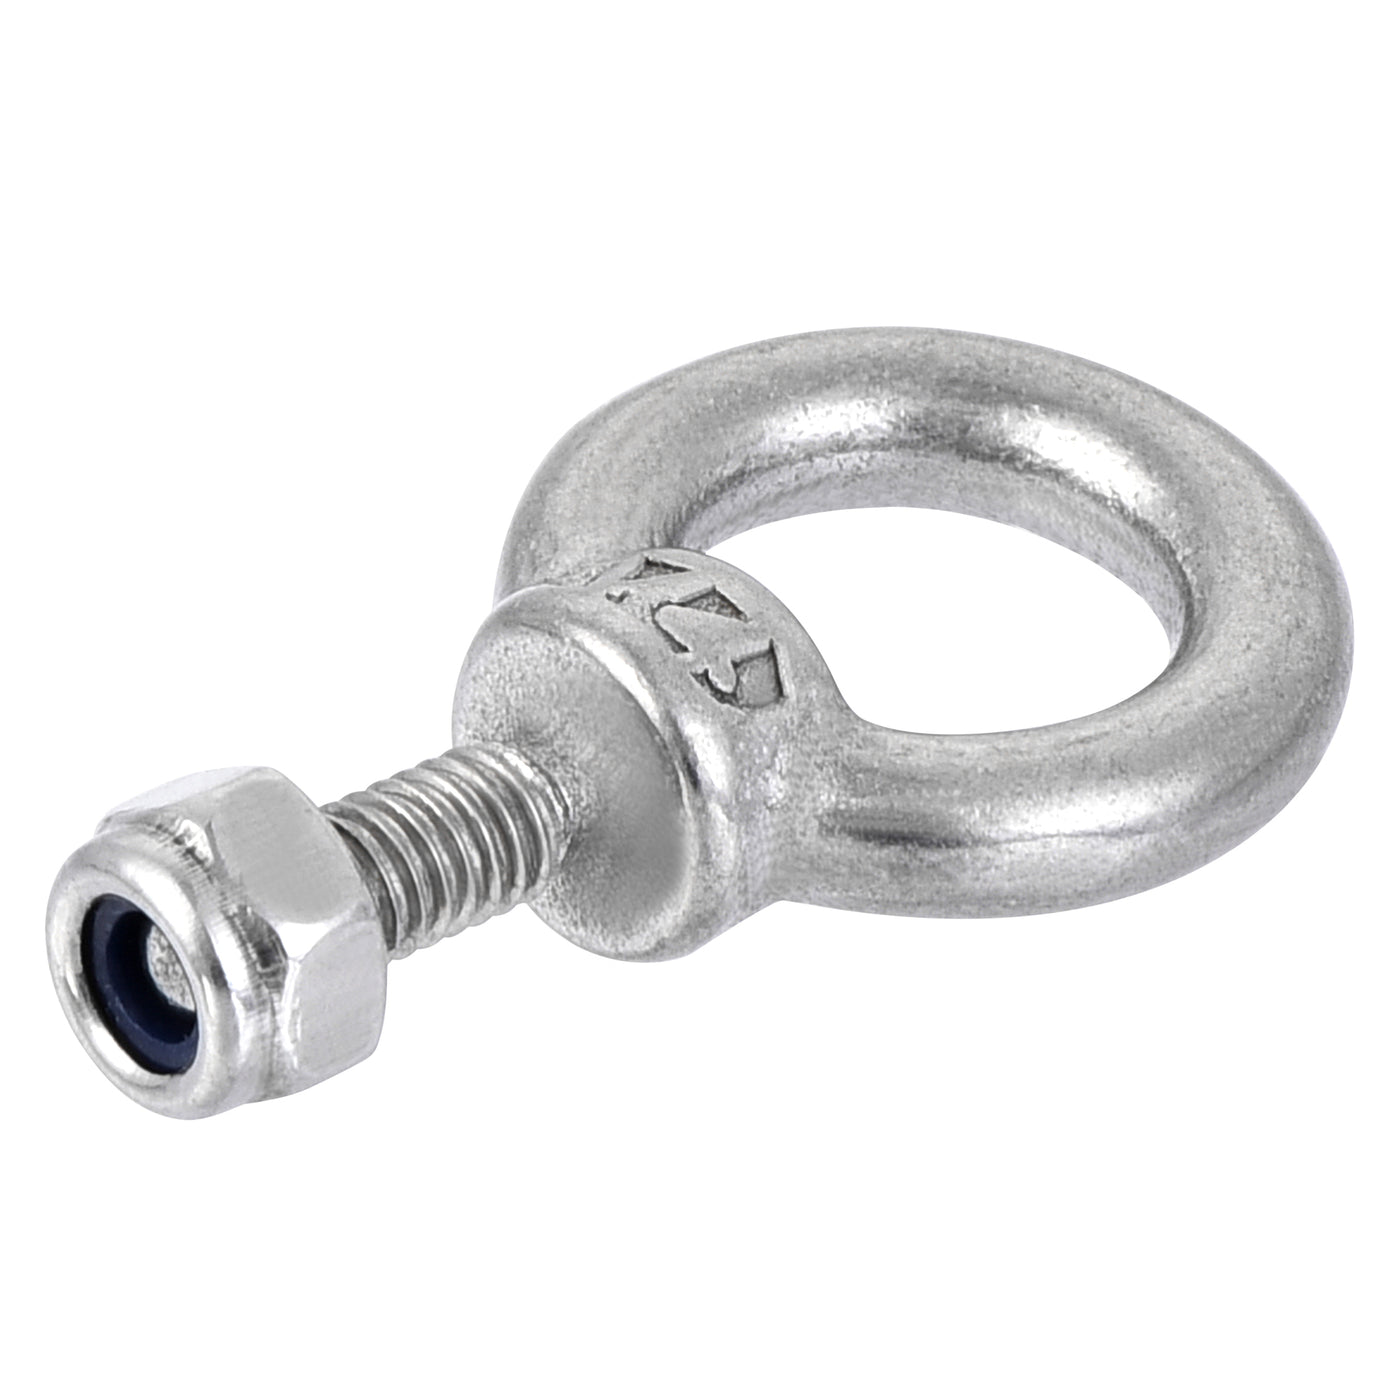 uxcell Uxcell Lifting Eye Bolt M4 x 11mm Male Thread with Hex Screw Nut for Hanging, 304 Stainless Steel, 2 Sets